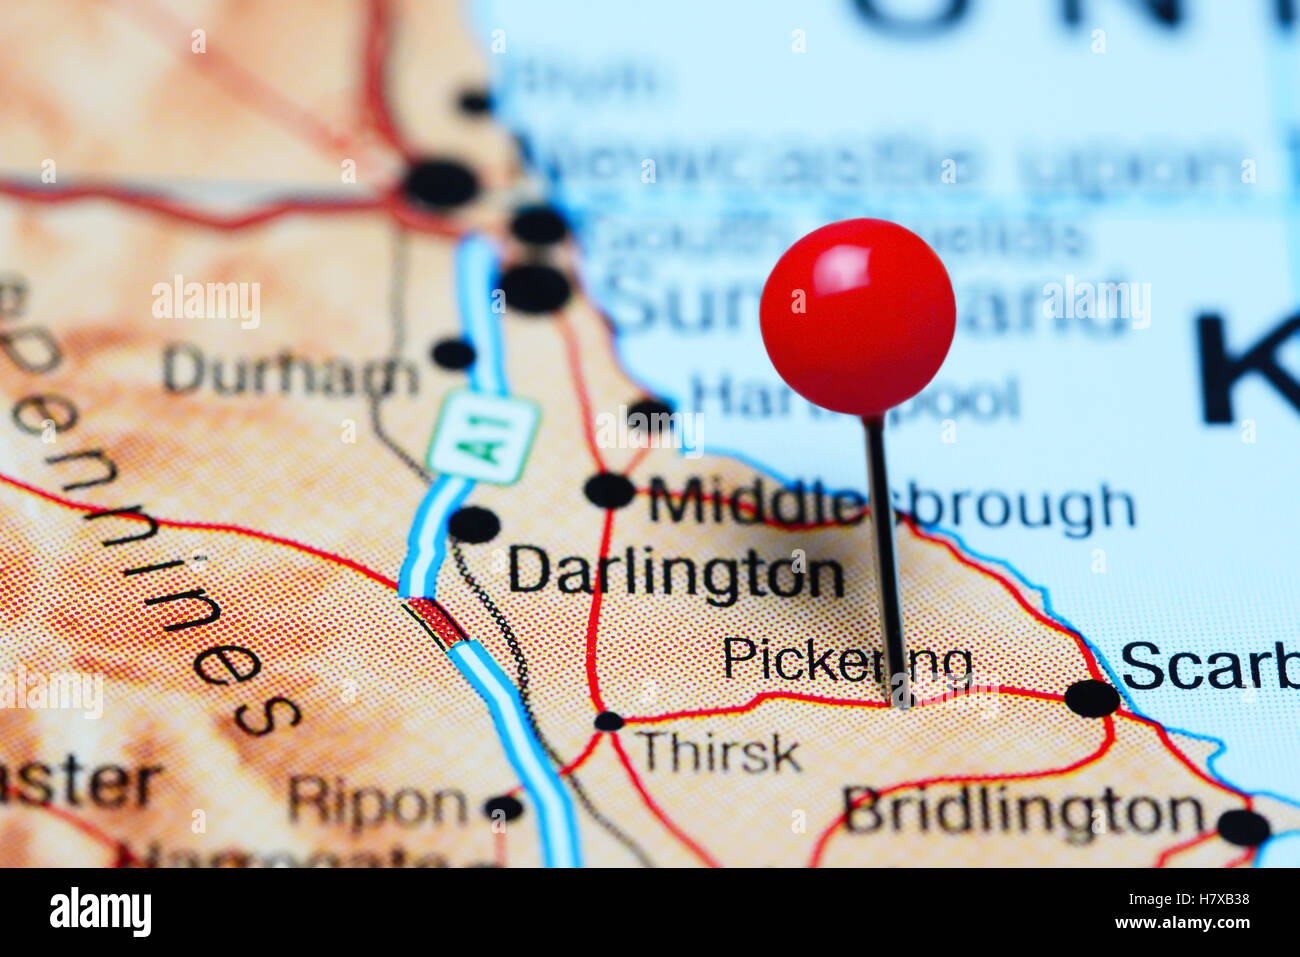 Pickering pinned on a map of UK Stock Photo